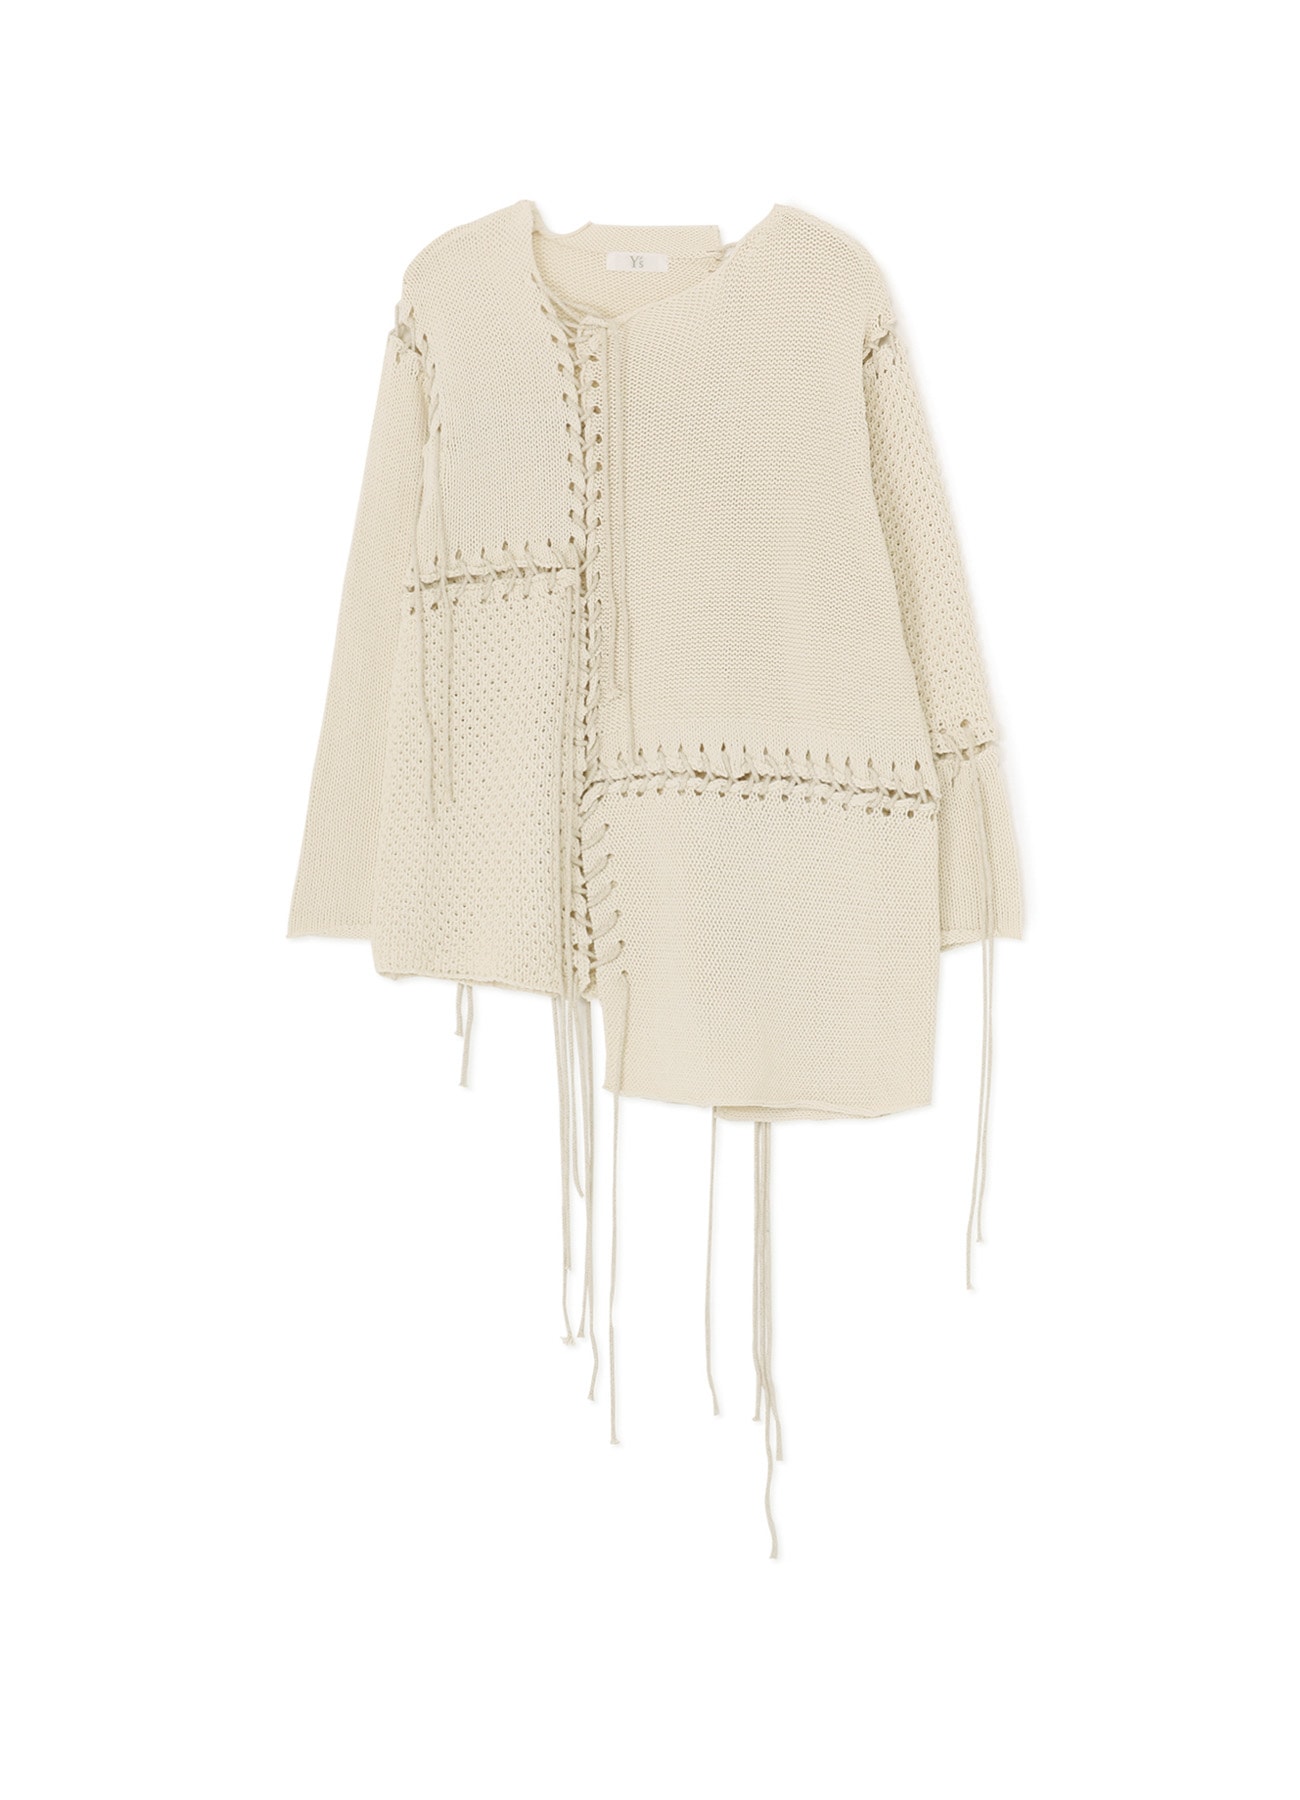 TUCK JERSEY LACE UP LONG PULLOVER(S Off White): Y's｜THE